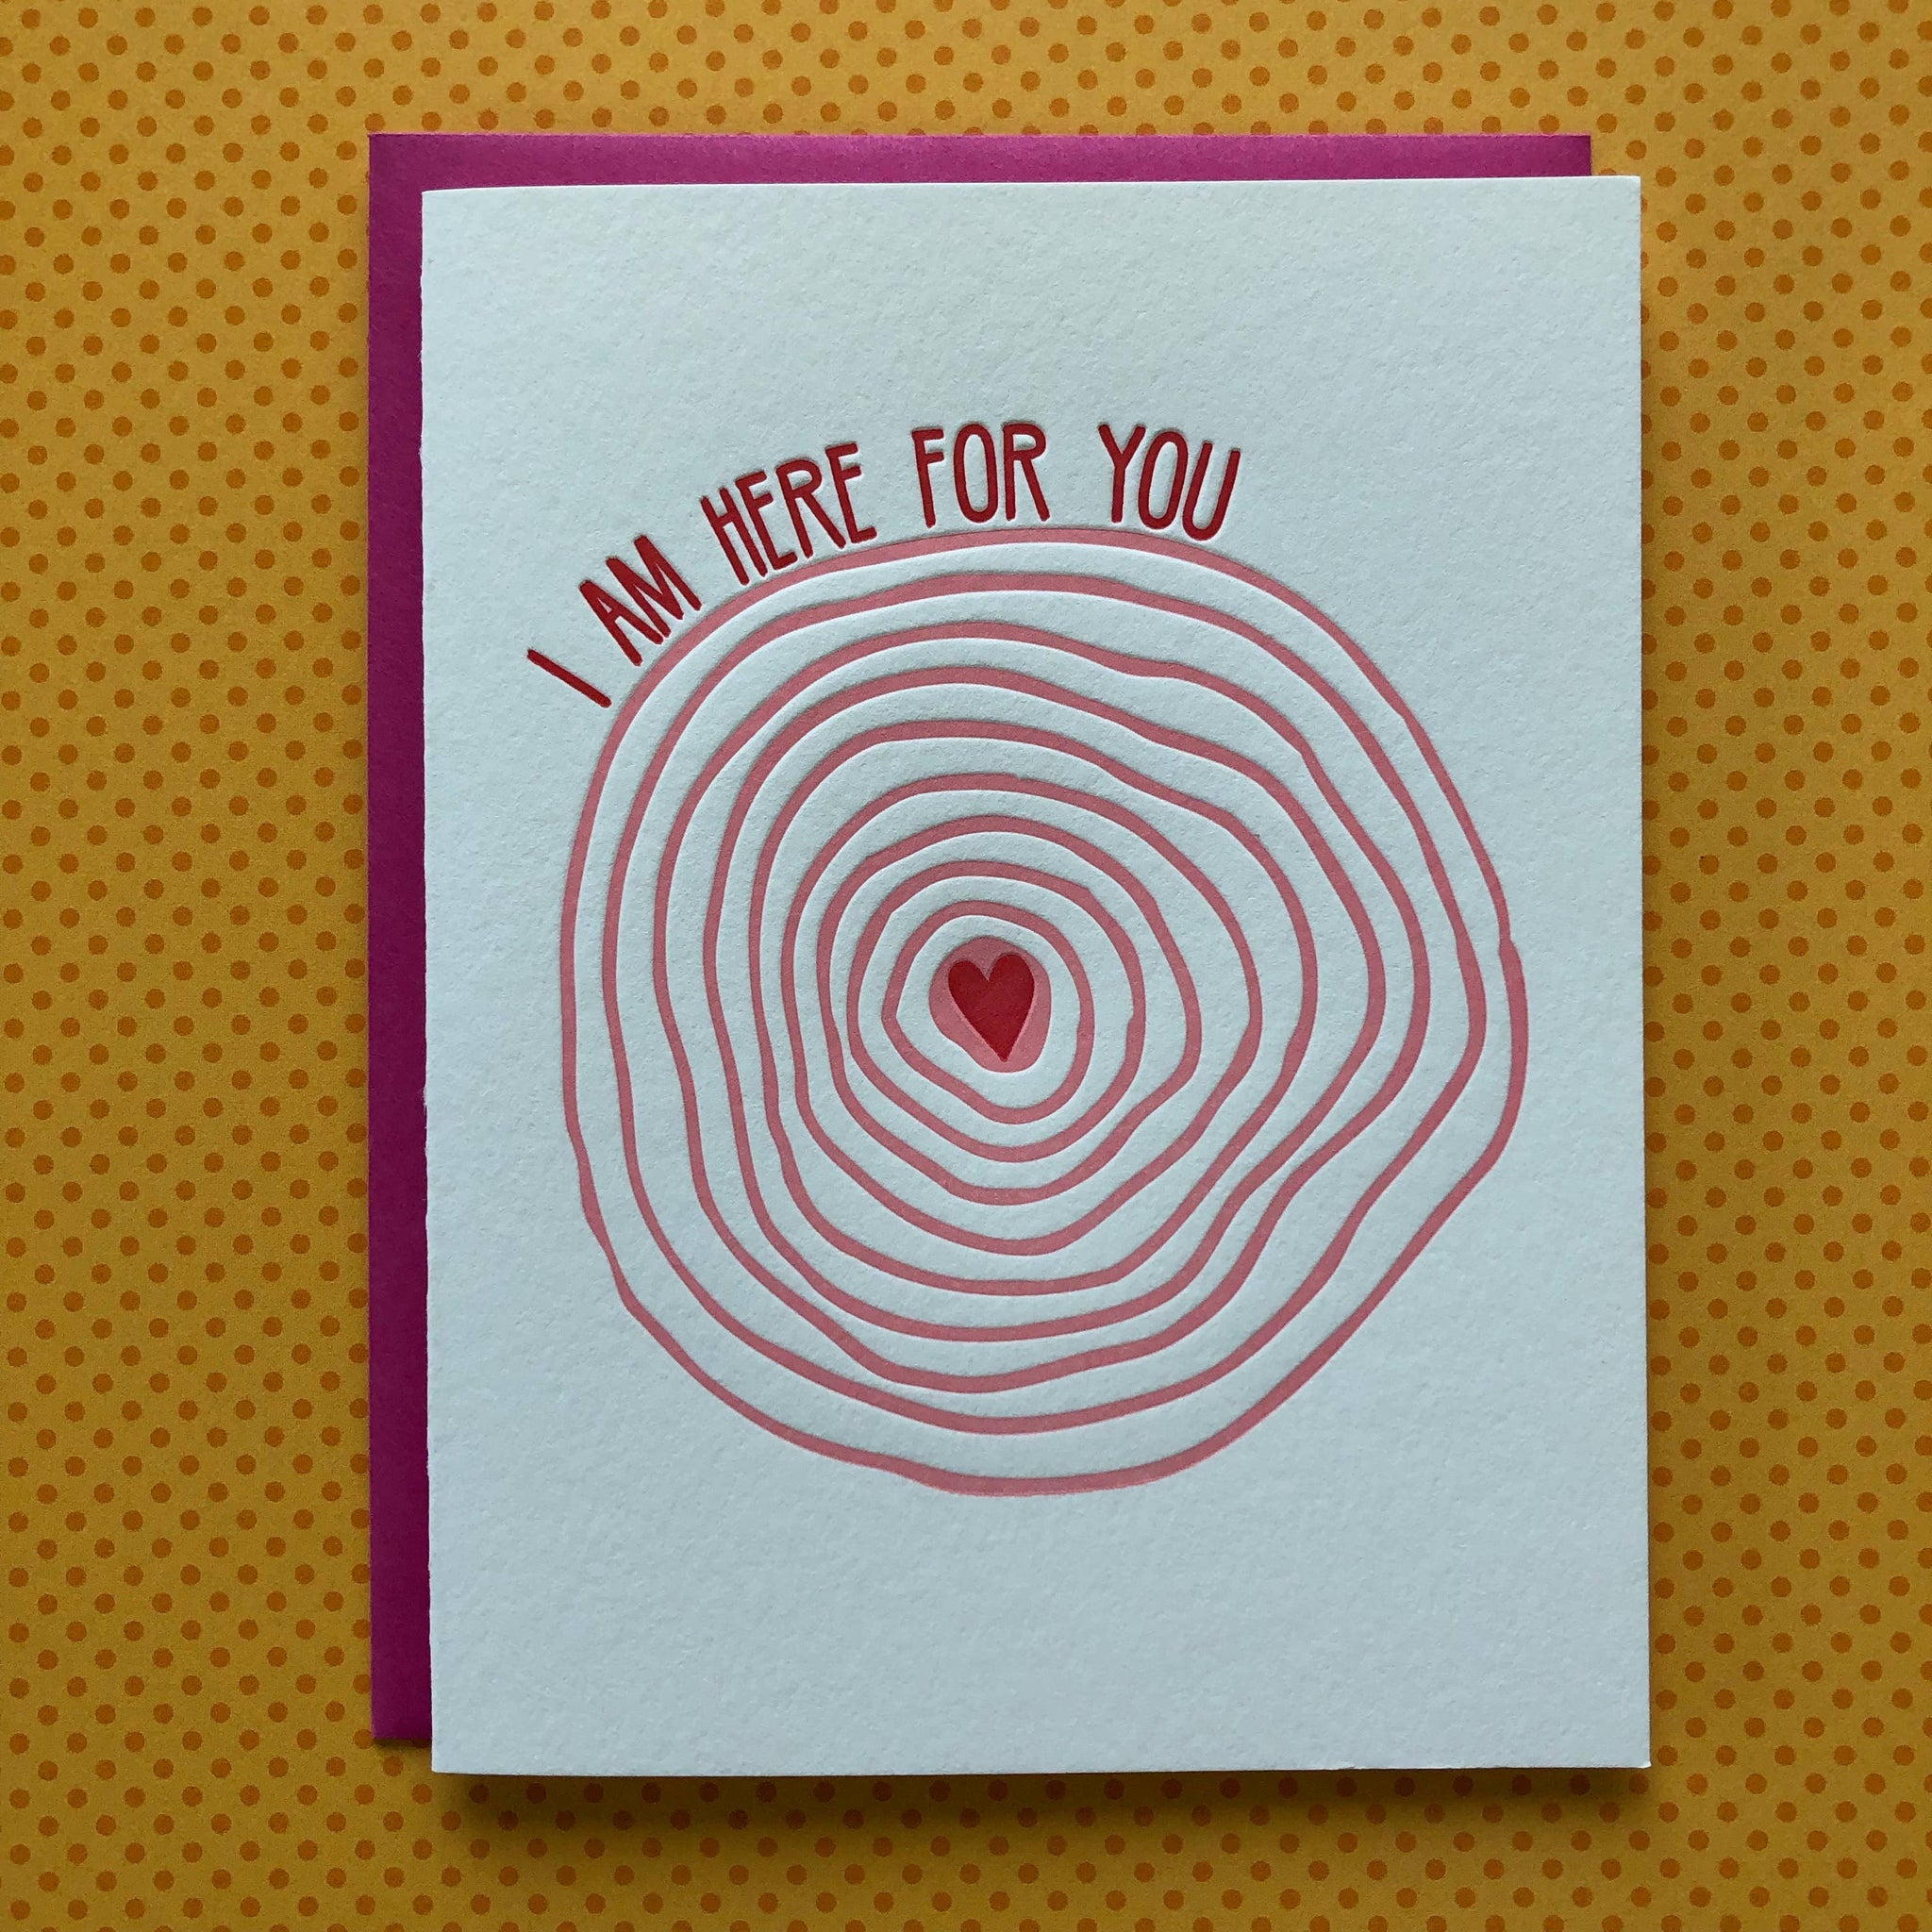 I am Here for You - letterpress card